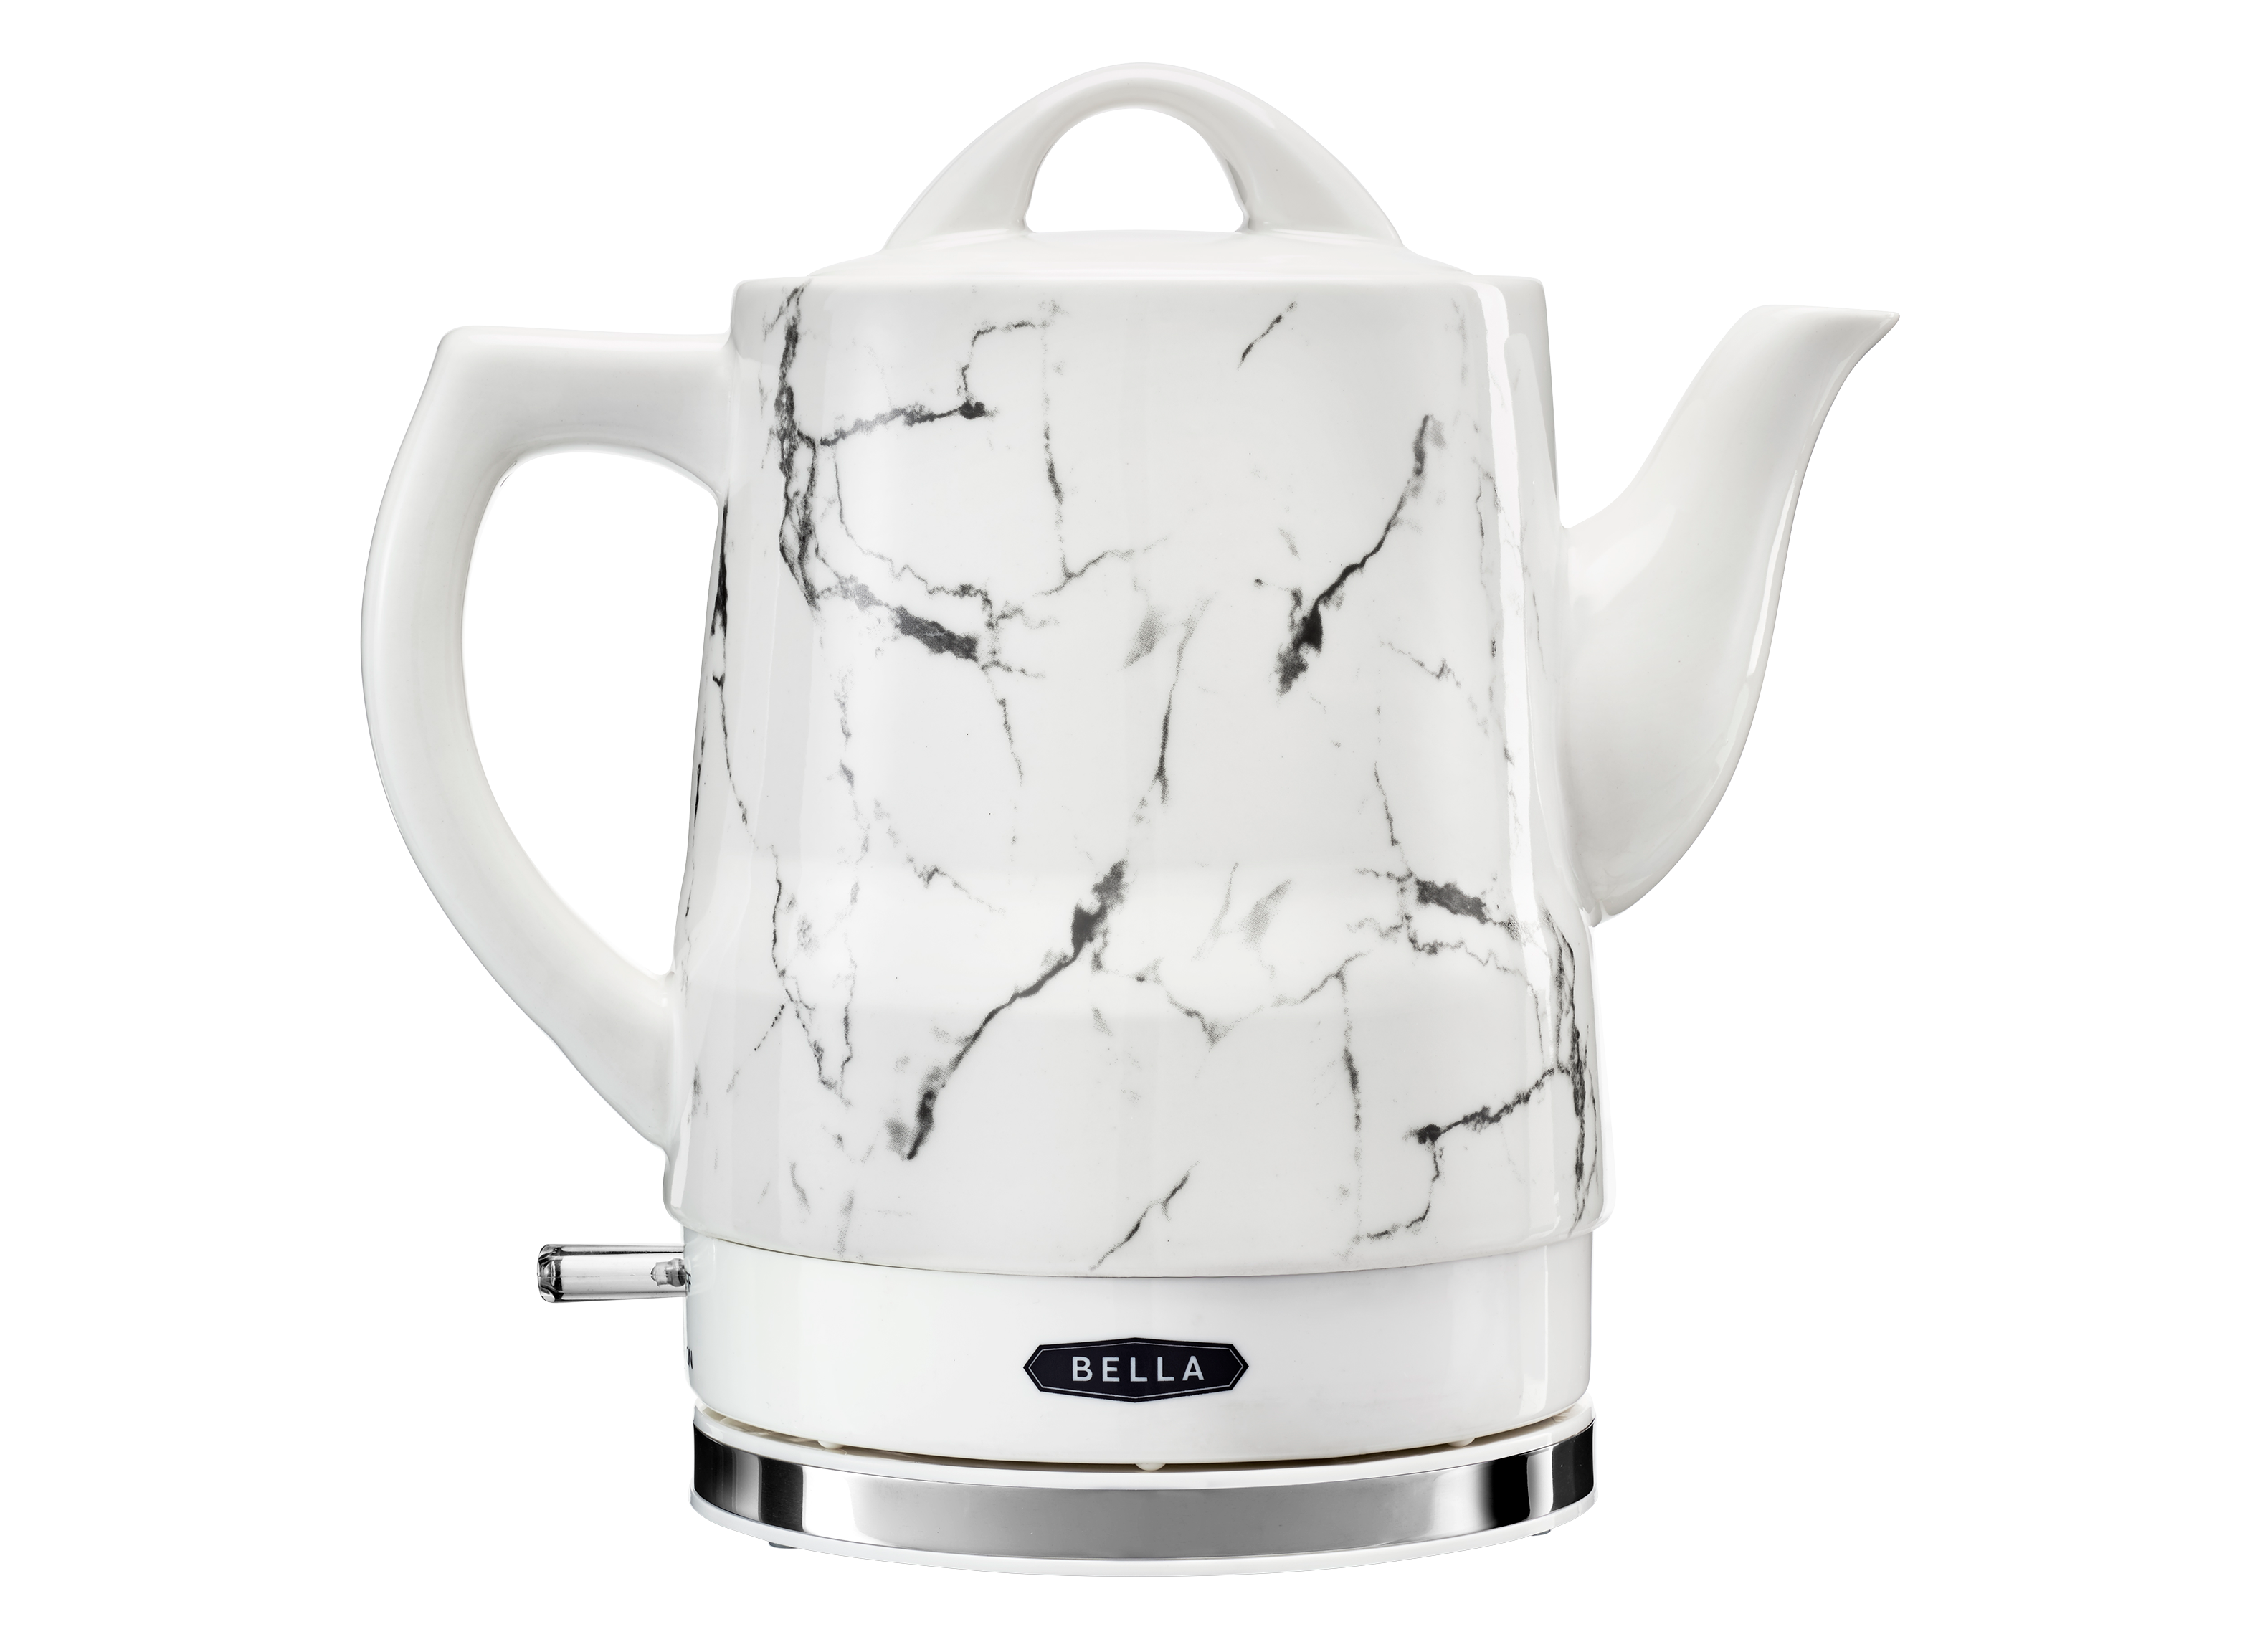 https://crdms.images.consumerreports.org/prod/products/cr/models/398977-electric-kettles-bella-ceramic-electric-kettle-10006674.png